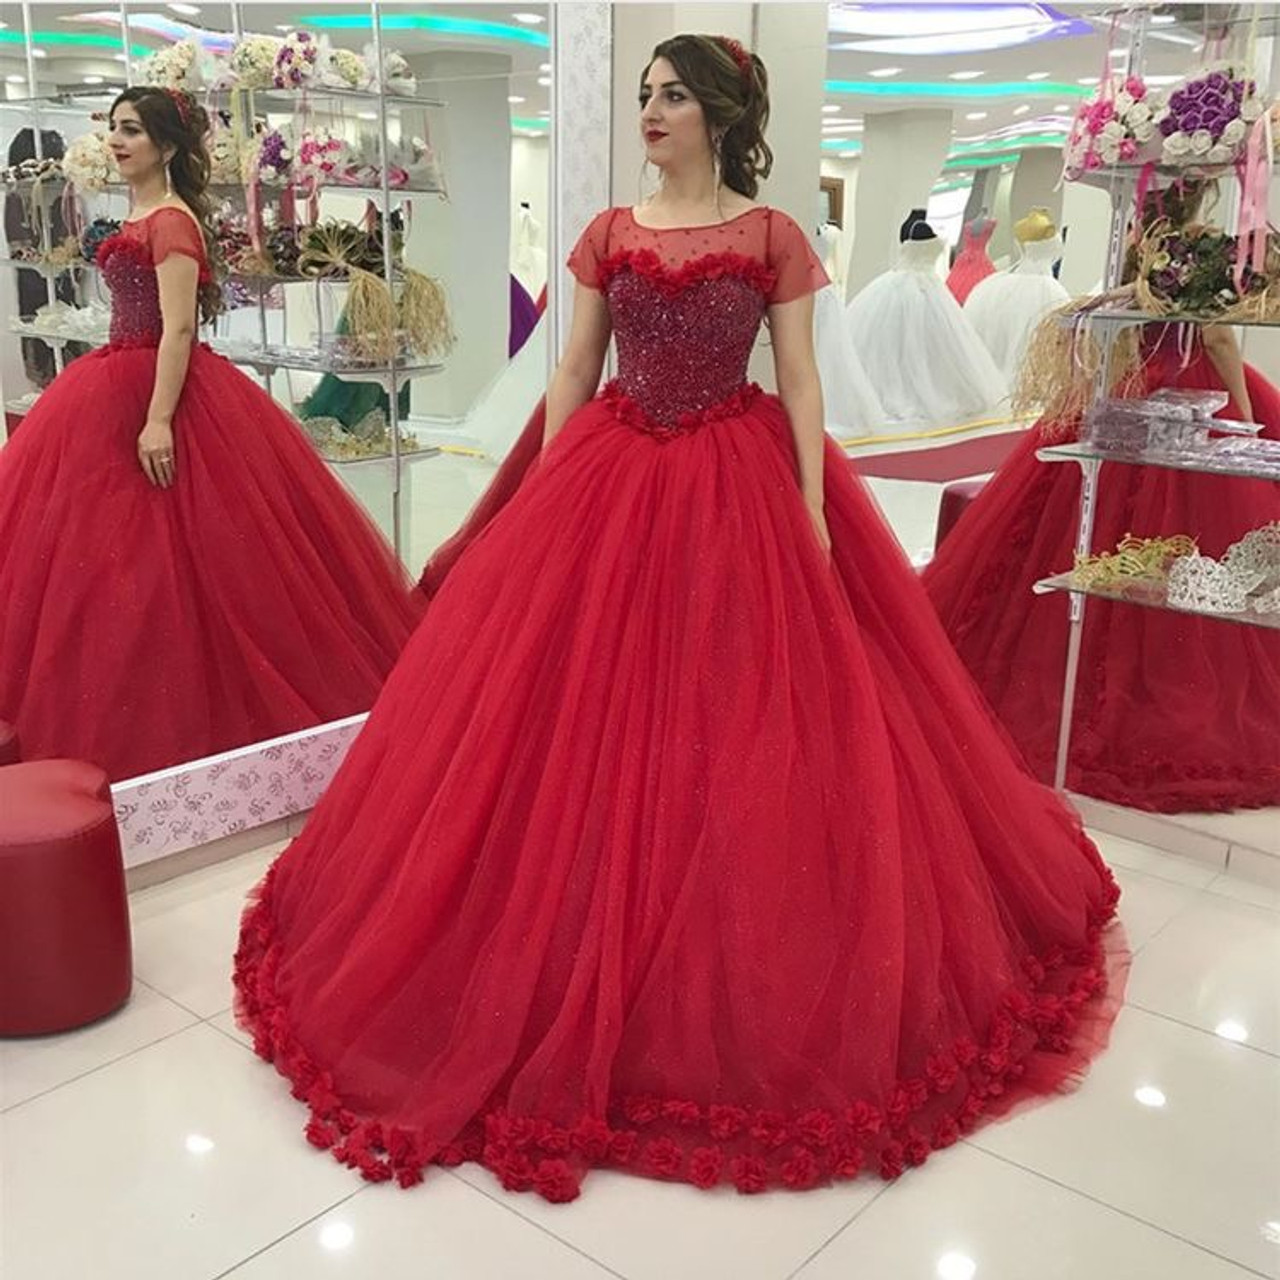 Sweetheart Bodice Corset Ruffles Red Prom Dresses Ball Gowns